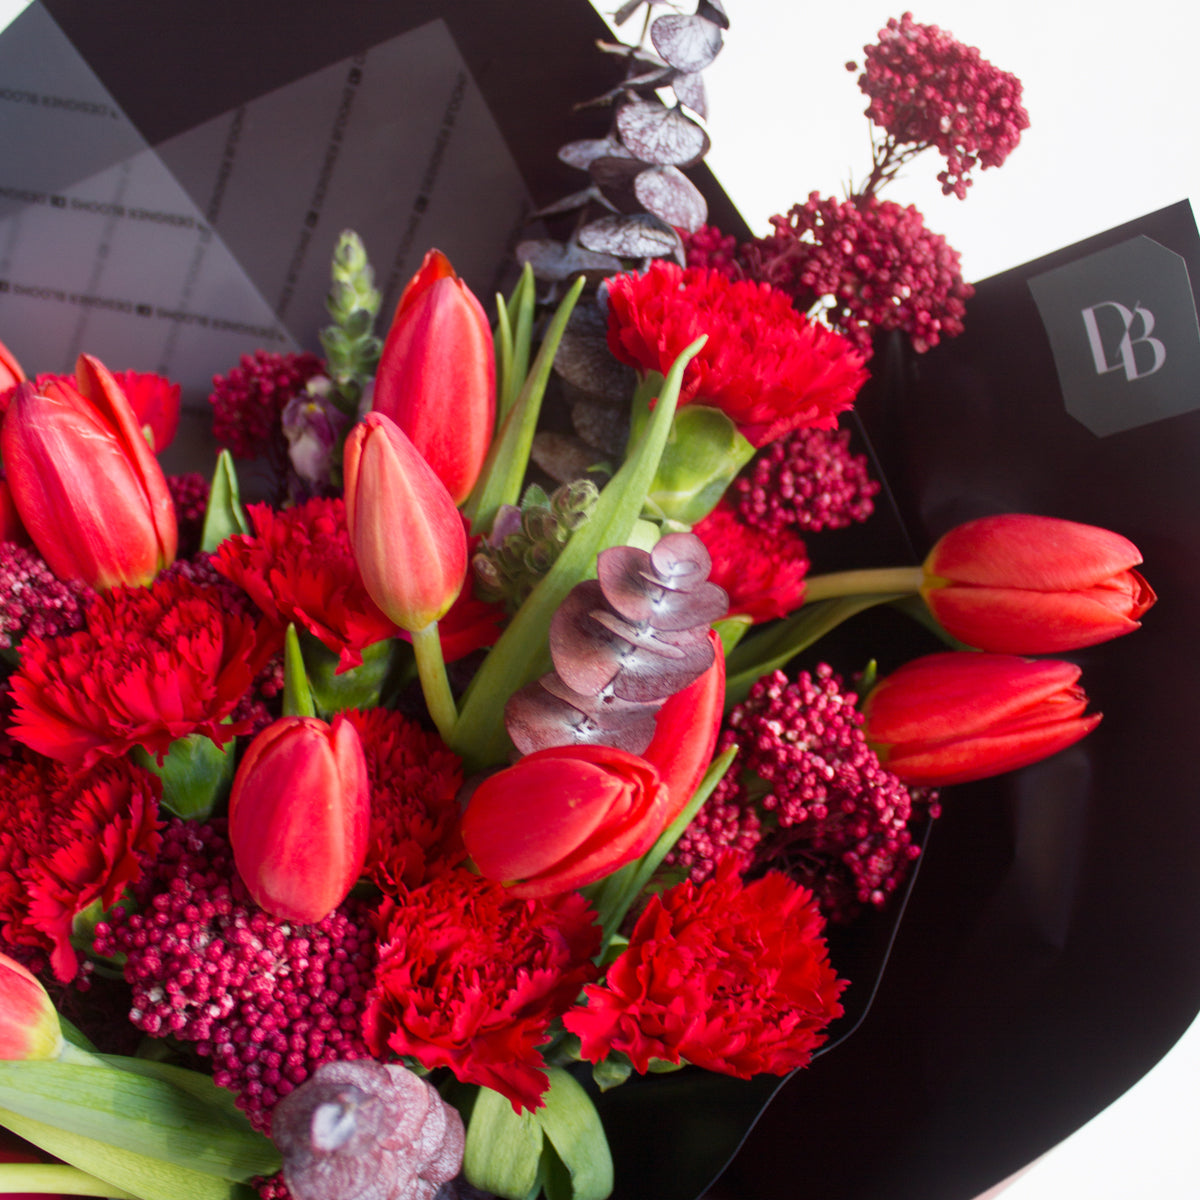 Tulips and Carnations - Red